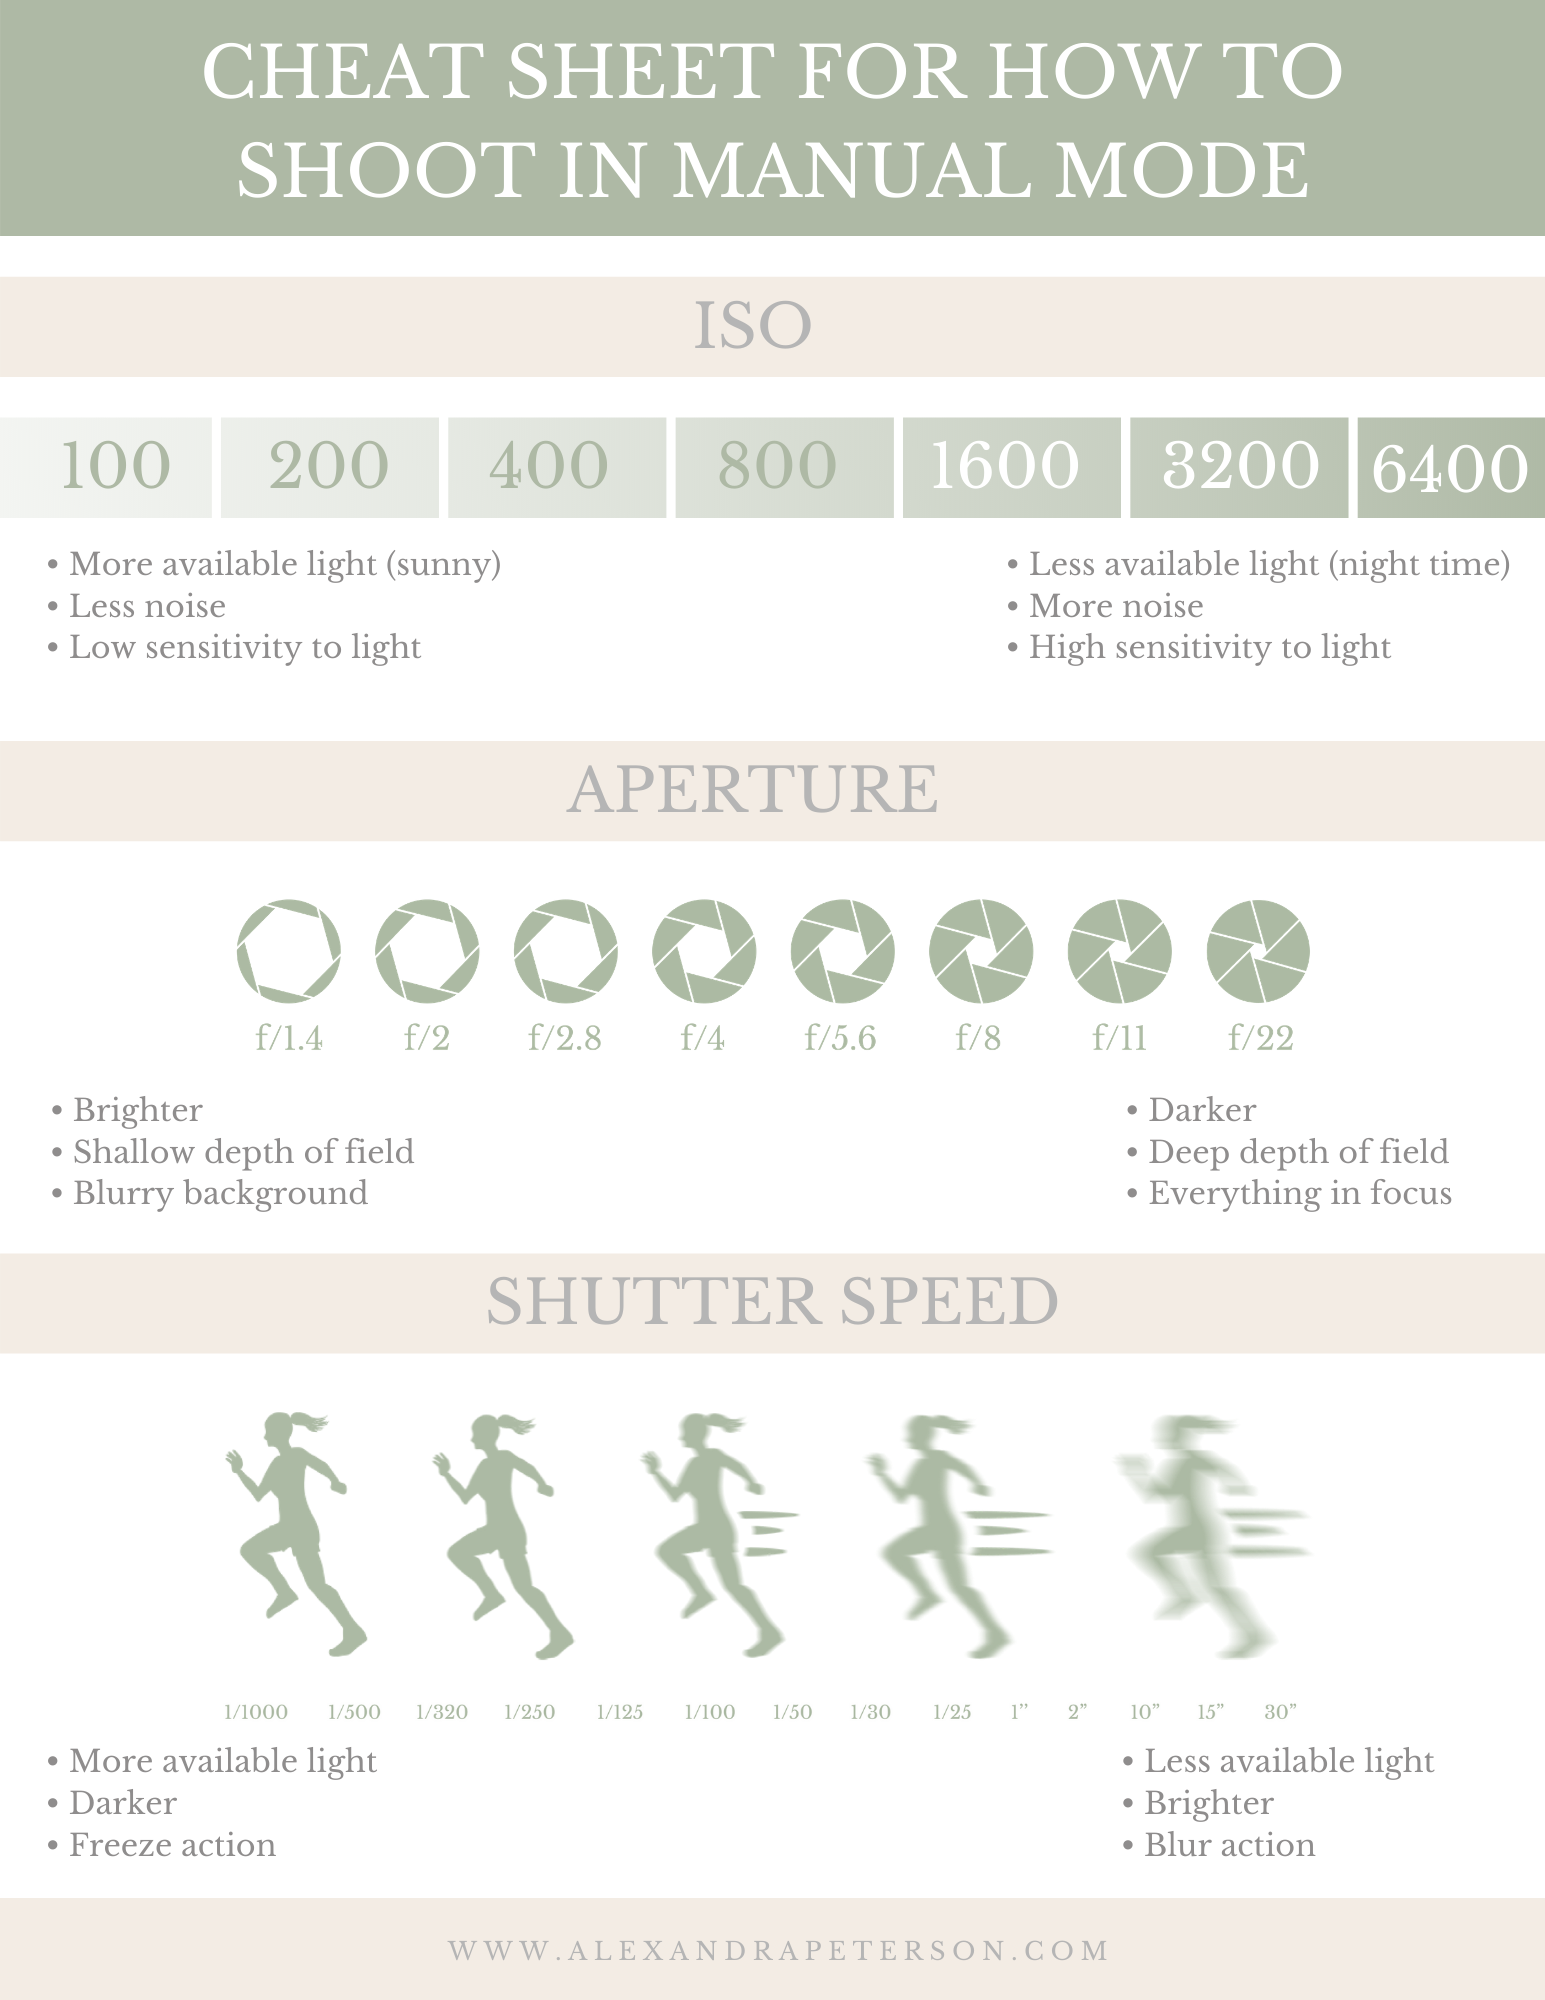 Cheat Sheet for How to Shoot in Manual Mode by Alexandra Peterson